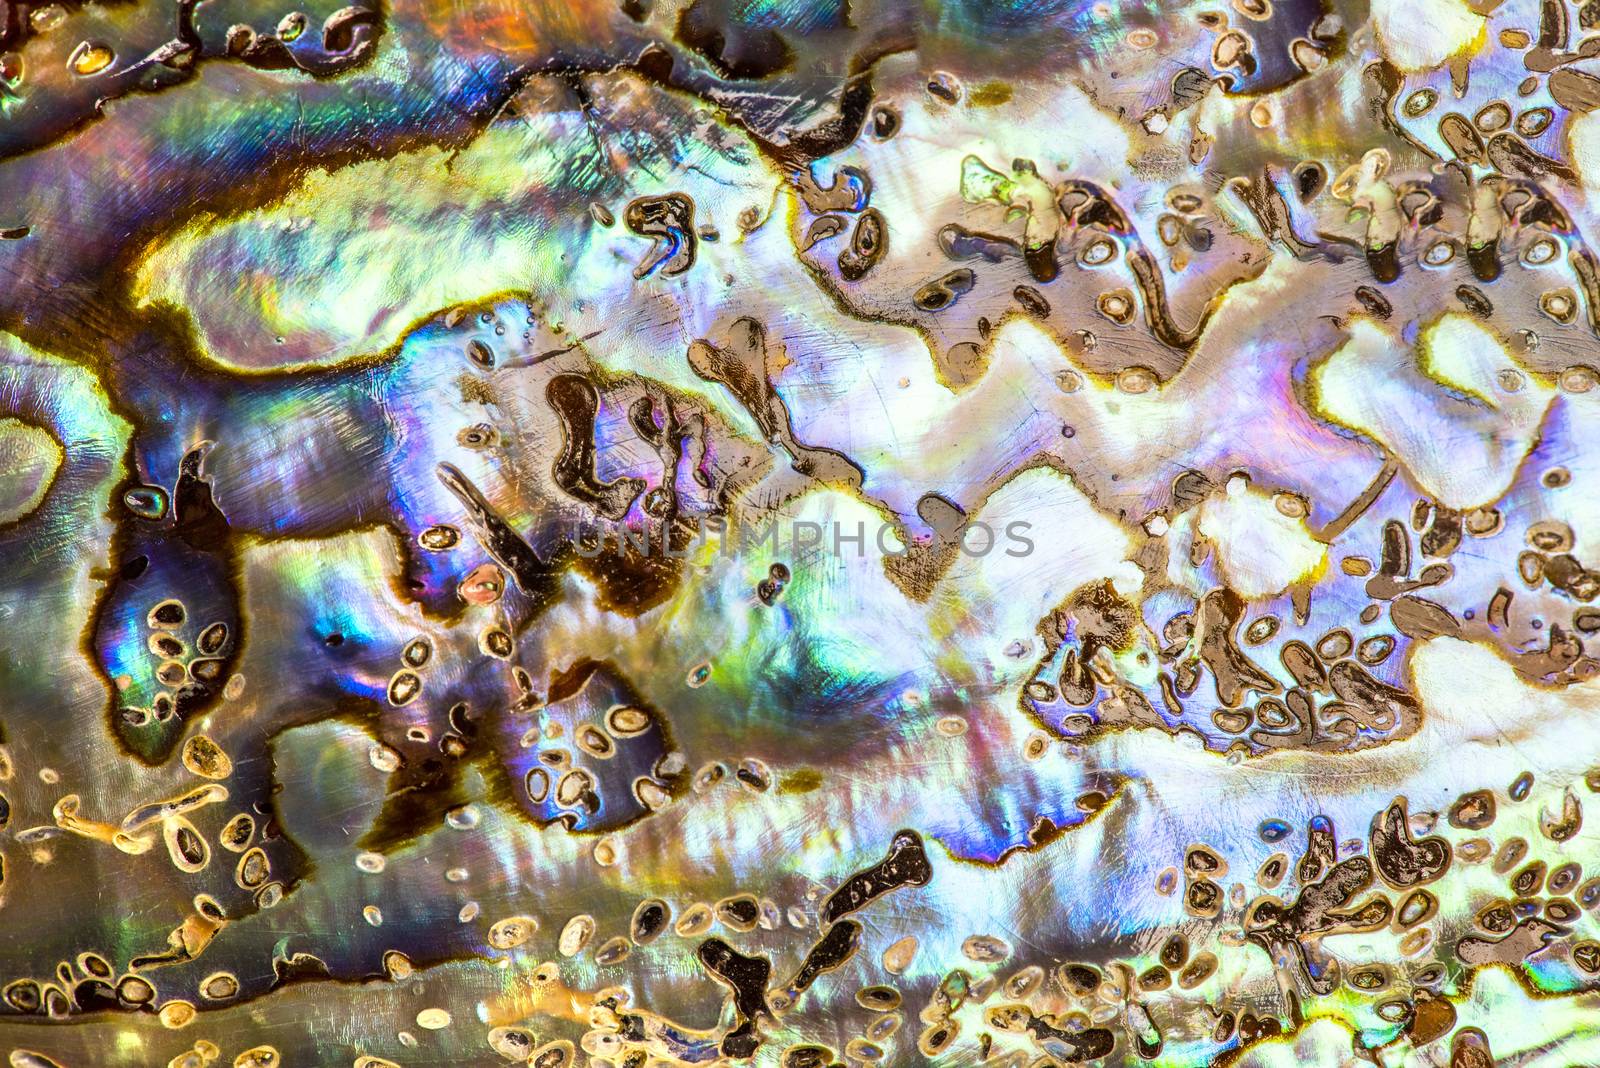 Detail of polished paua abalone shell by fyletto